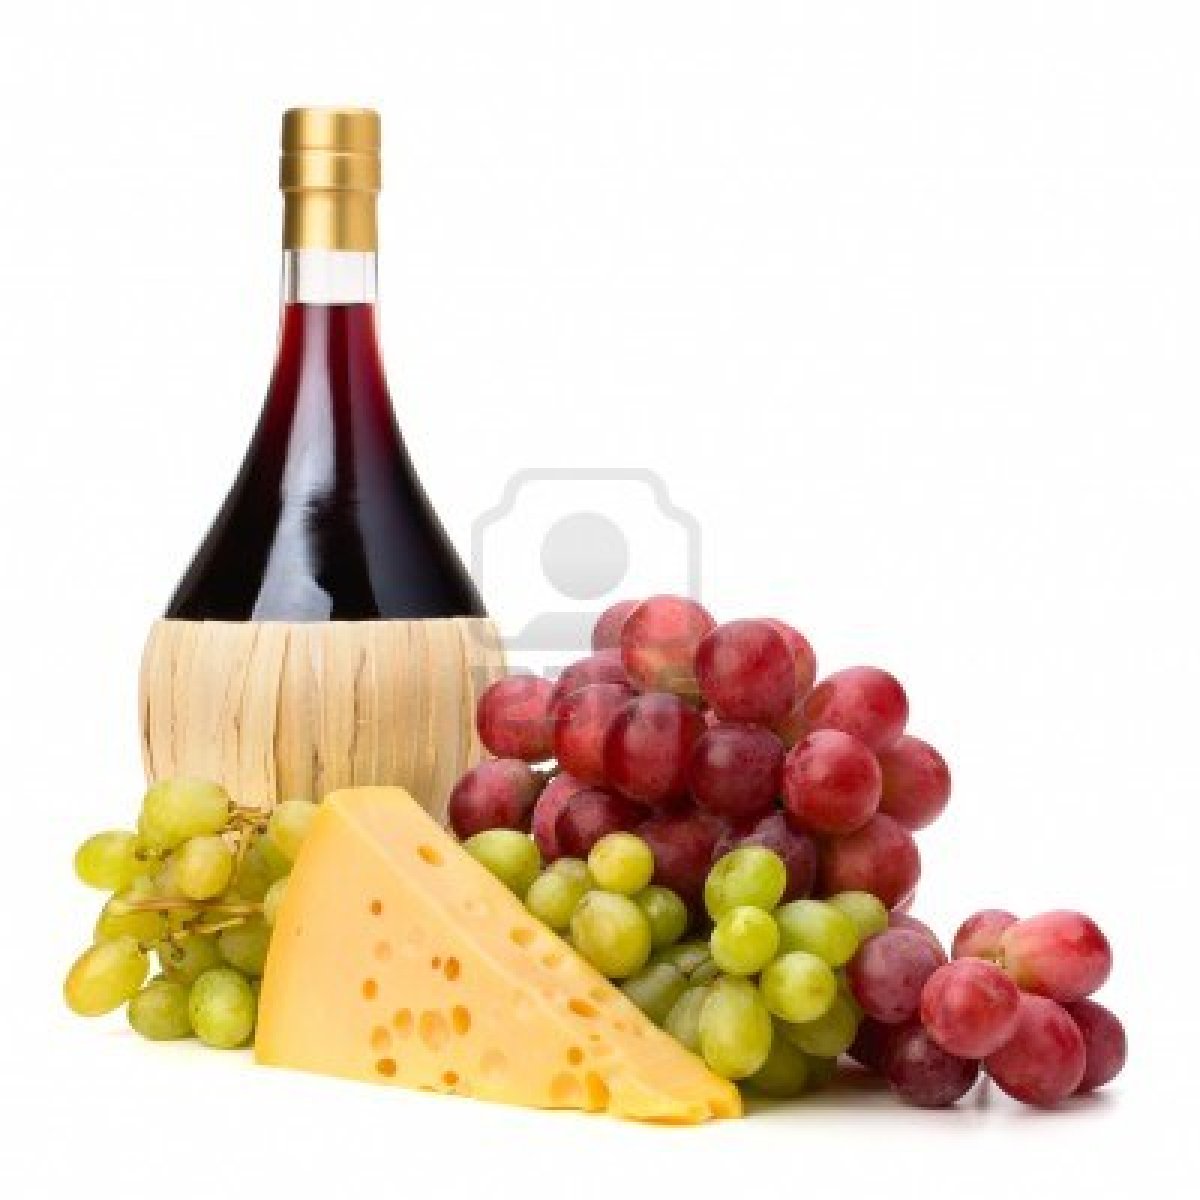 9244930-full-red-wine-bottle-and-grapes-isolated-on-white-background.jpg